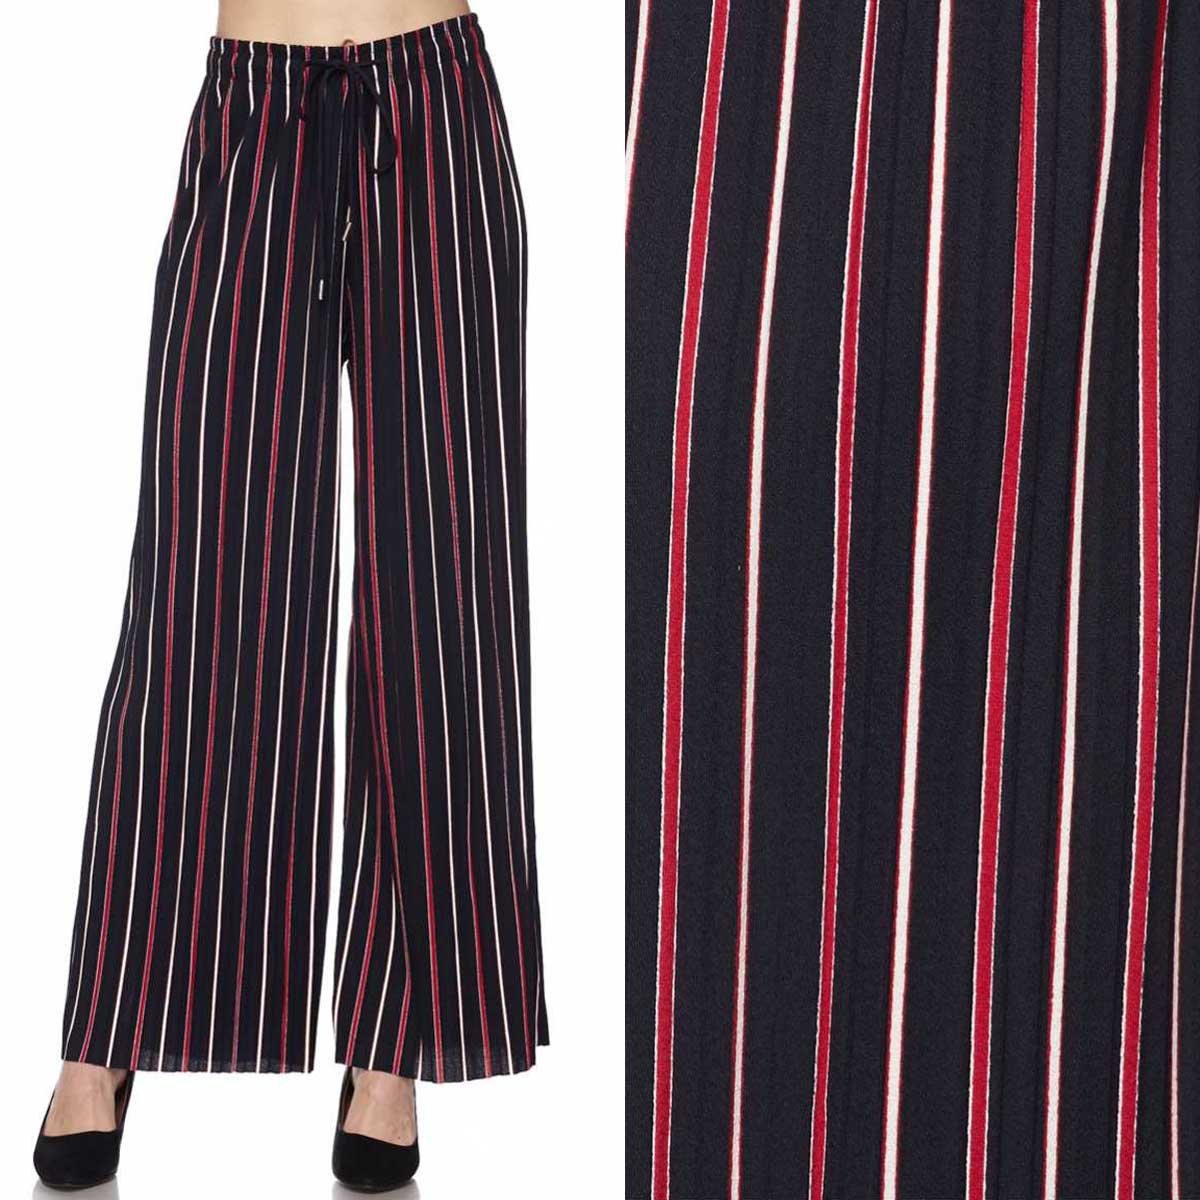 PLUS #12 Striped Navy-Red